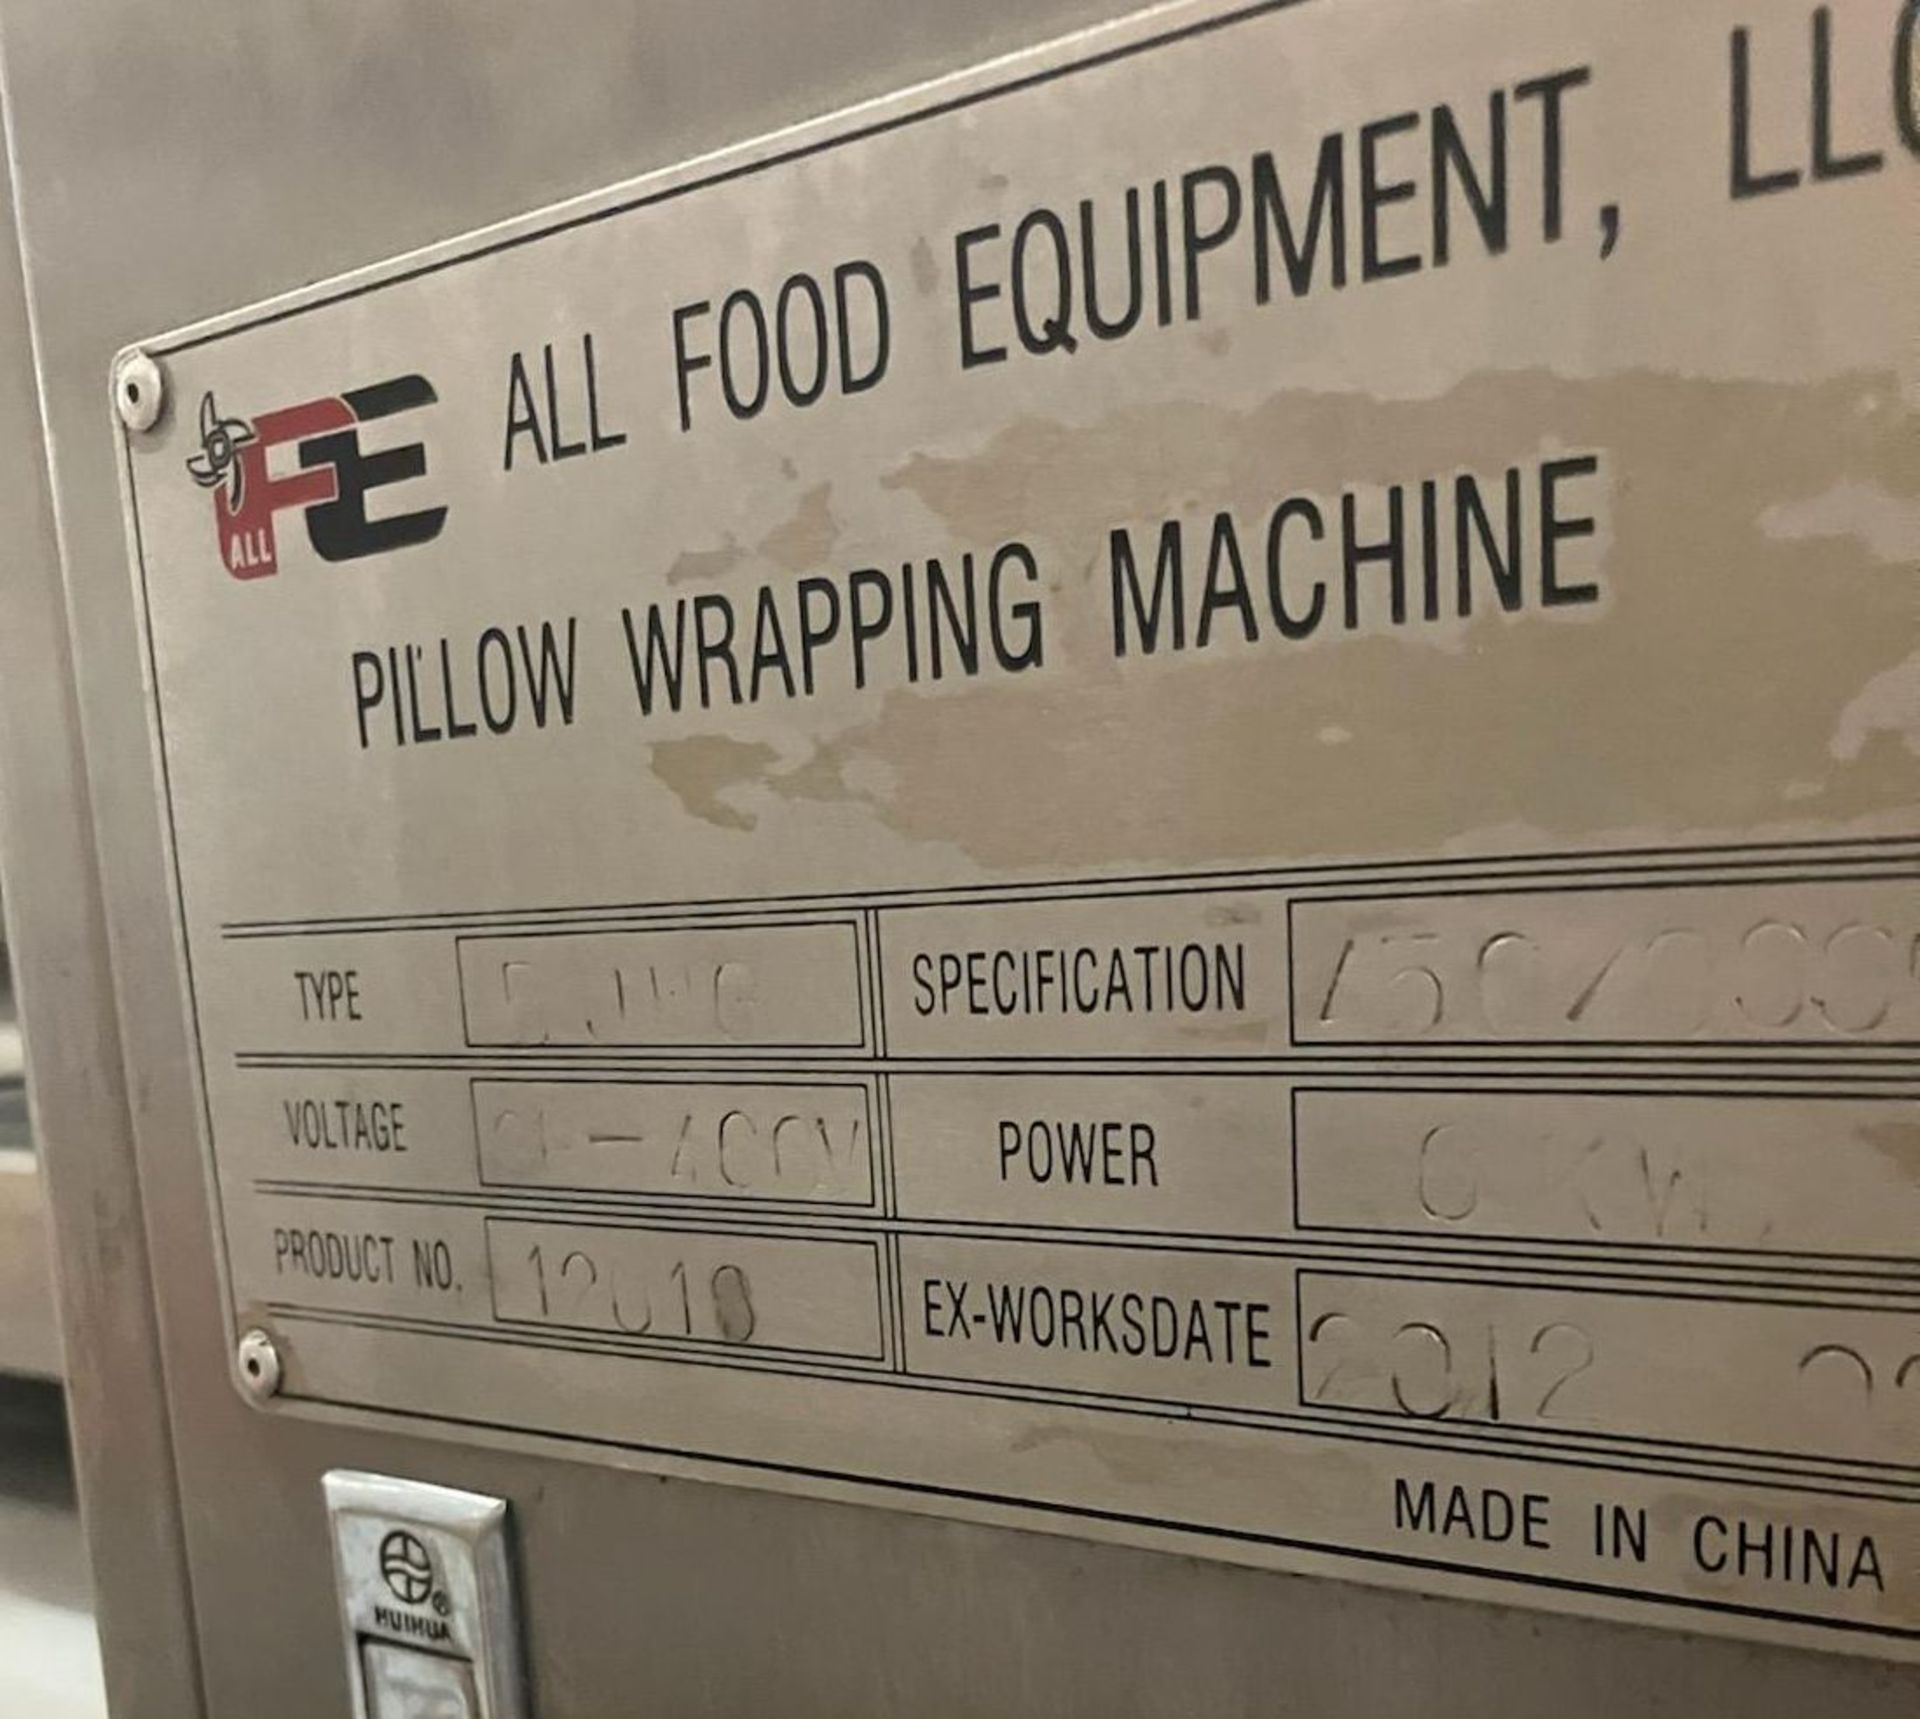 All Food Equipment (AFE) Pillow Wrapping Machine / Tray Wrapper, 480 VAC / 3 Phase | Rig Fee $100 - Bild 7 aus 7